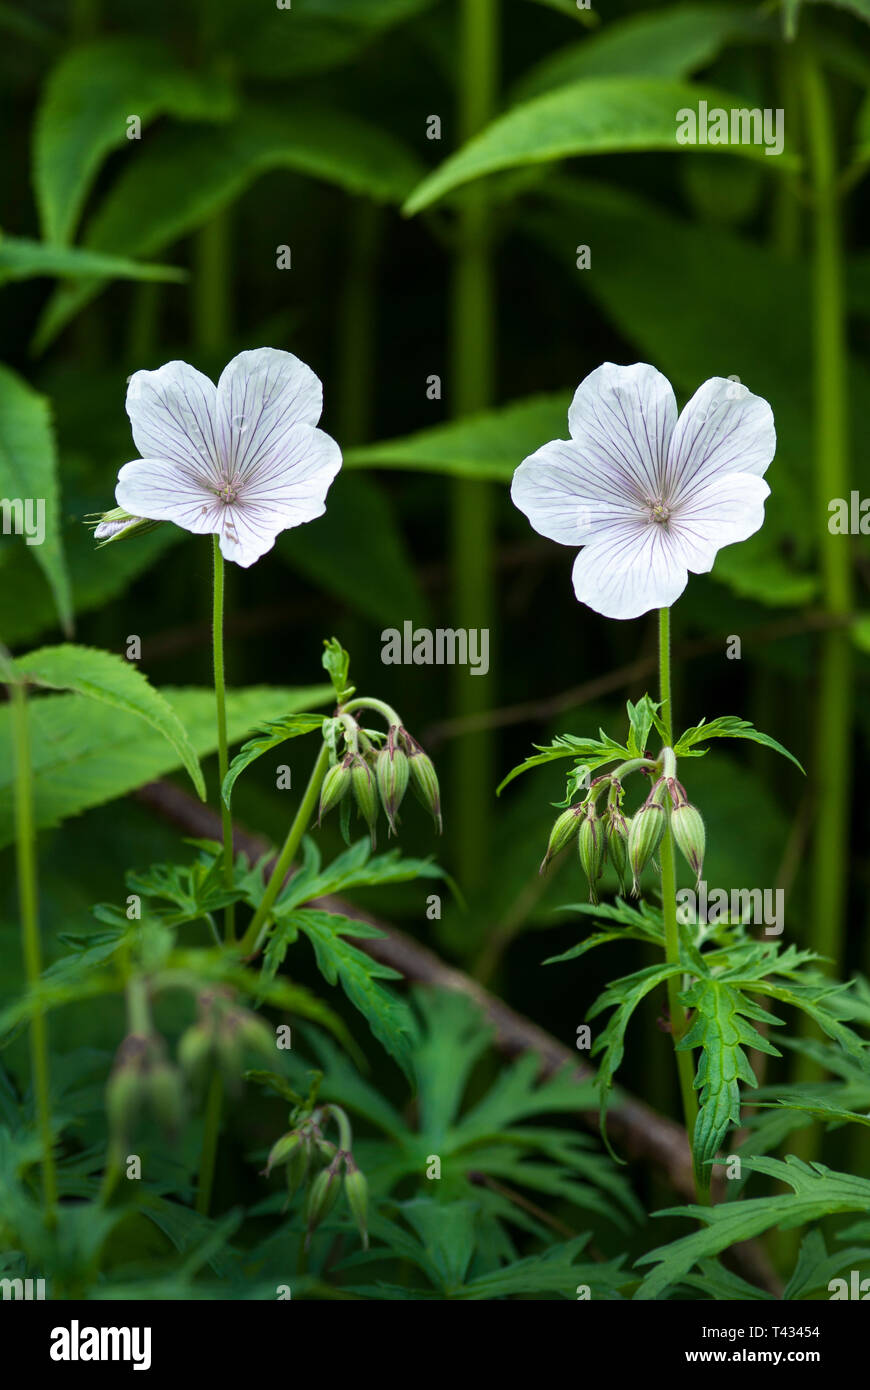 Two cranesbill, Geranium clarkei 'Kashmir White' in shade, with leaves and among other greenery Stock Photo